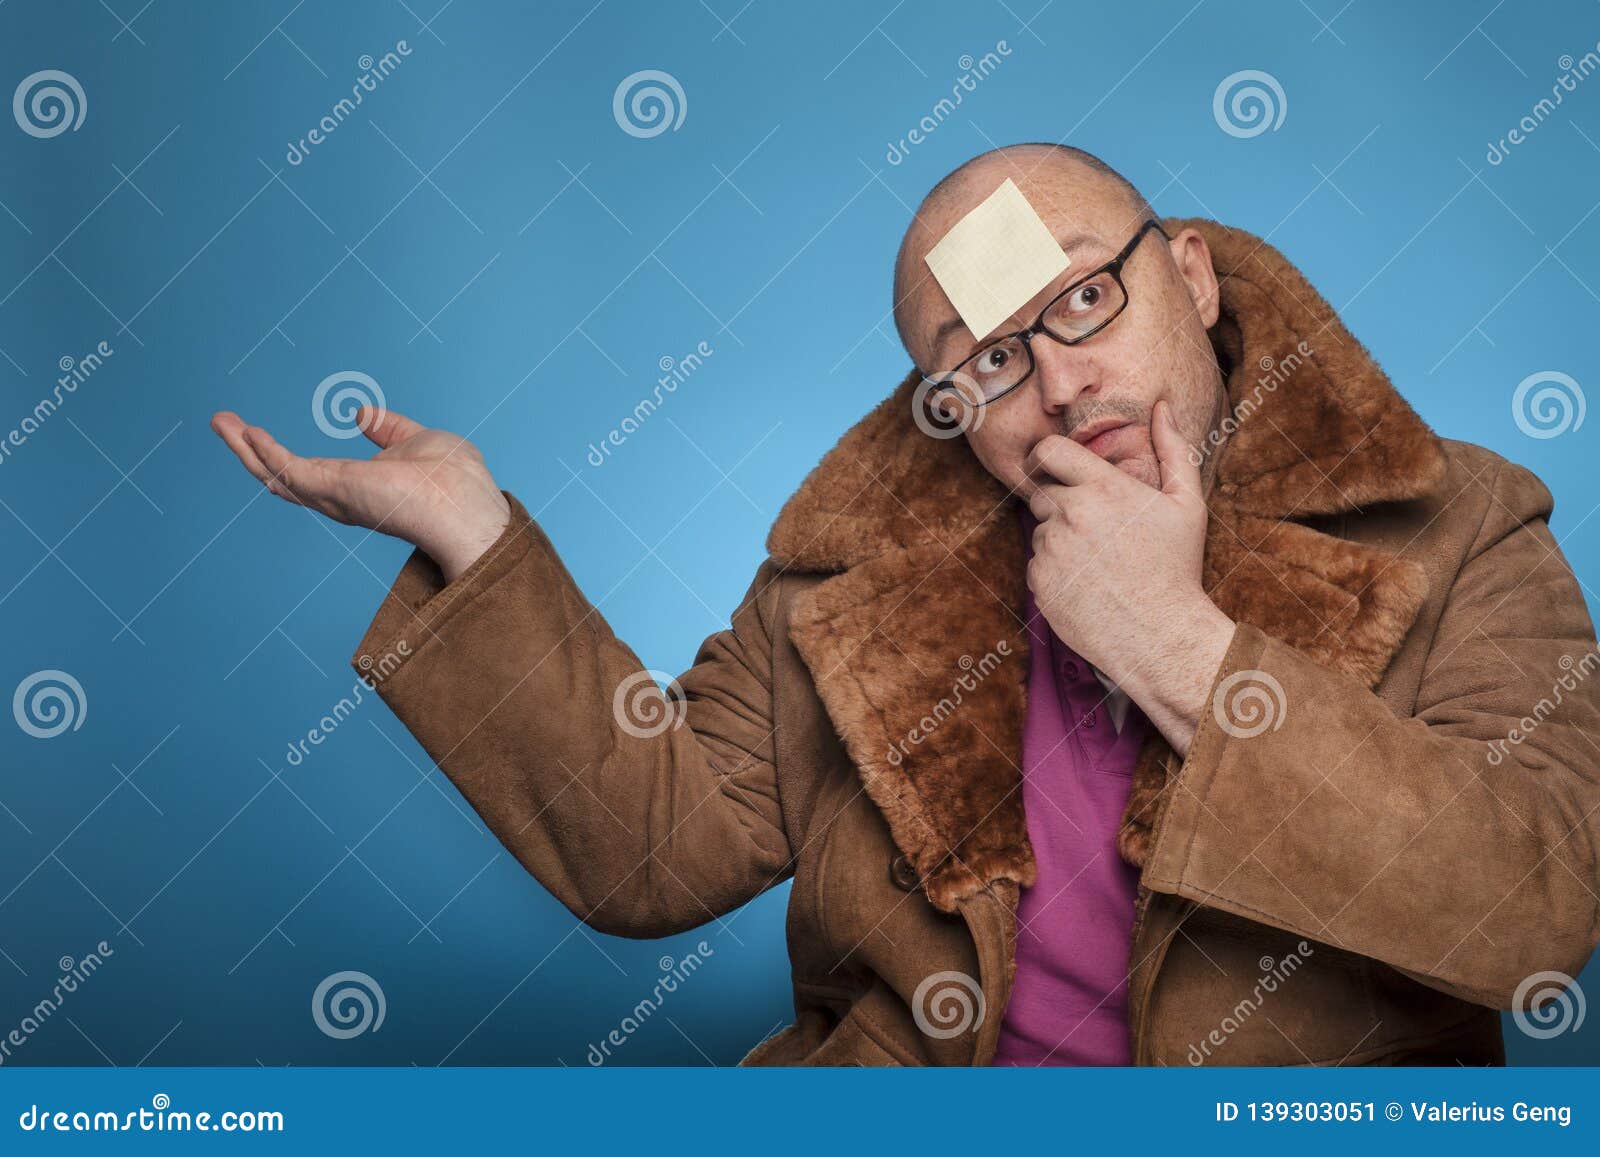 an elderly bald man in a fur coat has a blank post it on the forehead